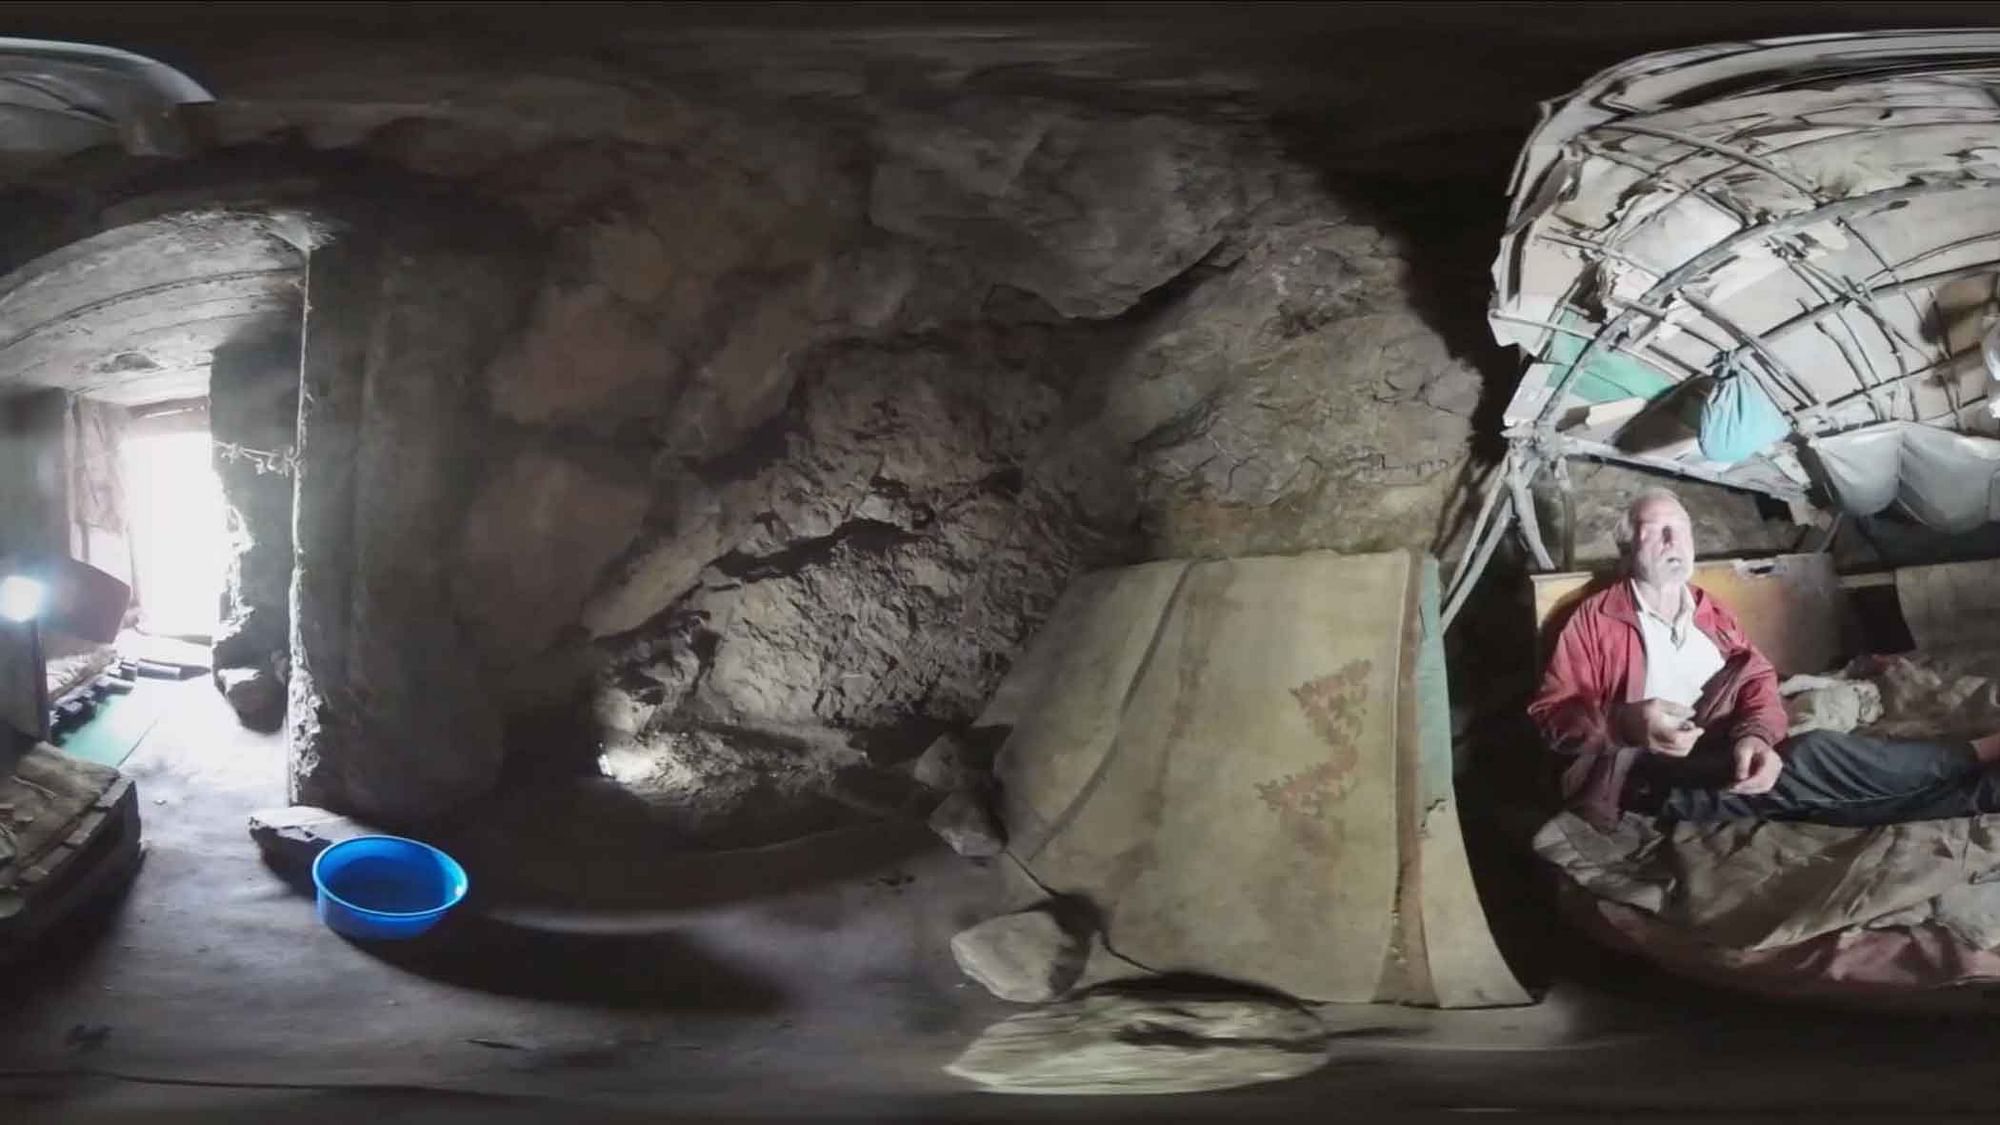 A 360 video of the life of a man who lives in a cave, captured by Dado Ruvic. (Courtesy: Reuters Focus360 Screengrab)